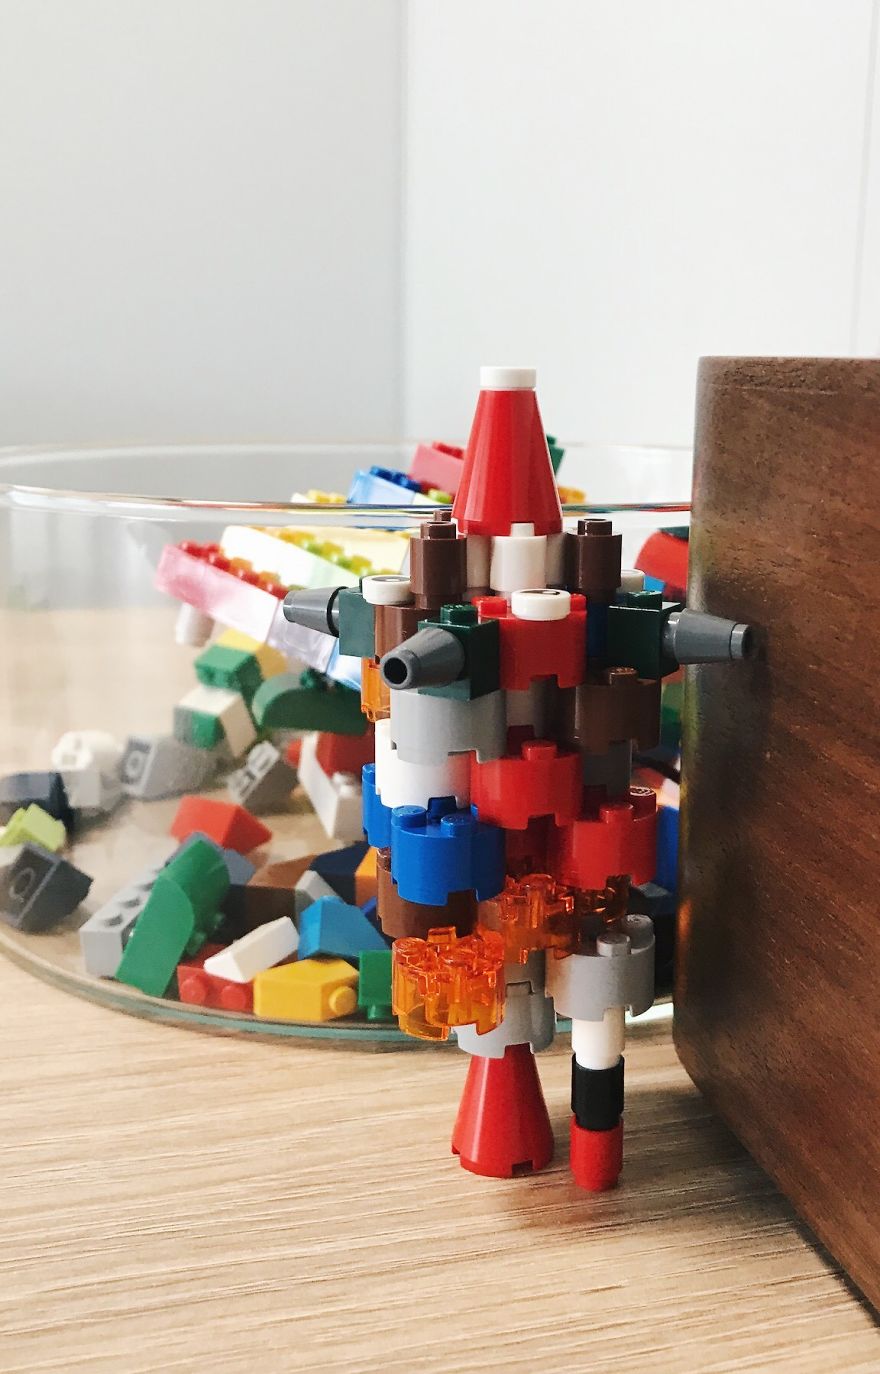 We Left Classic Lego At The Office Full Of Engineers And This Is What Happened